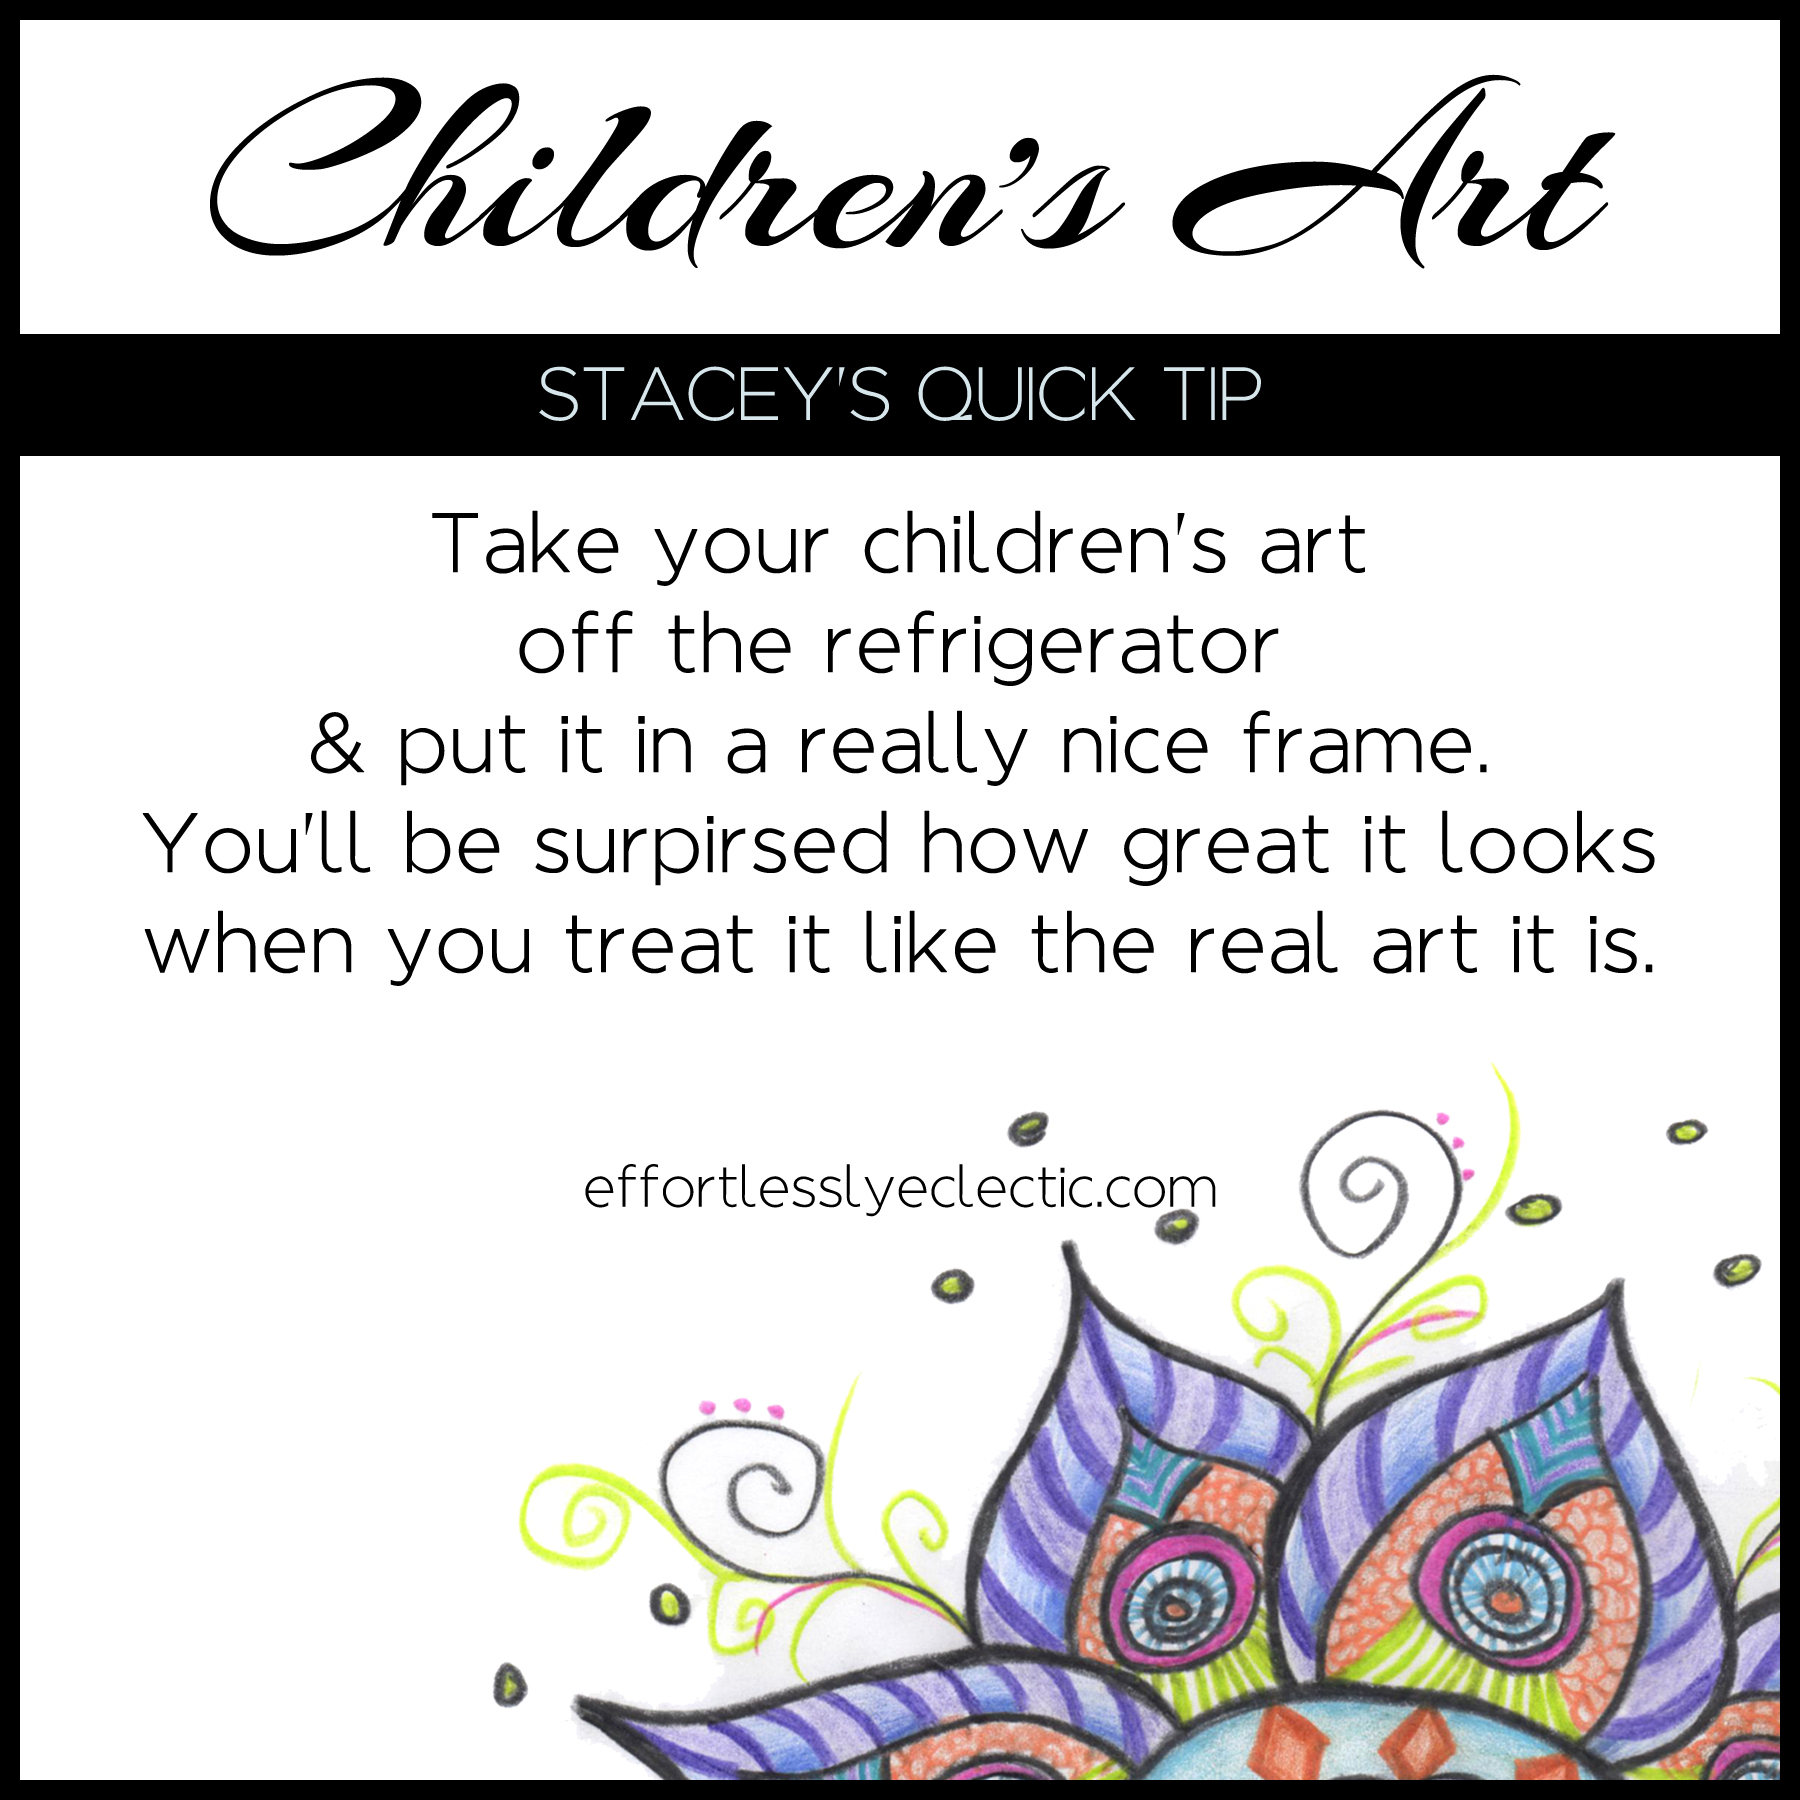 Children's Art - A home decor tip about decorating with children's art